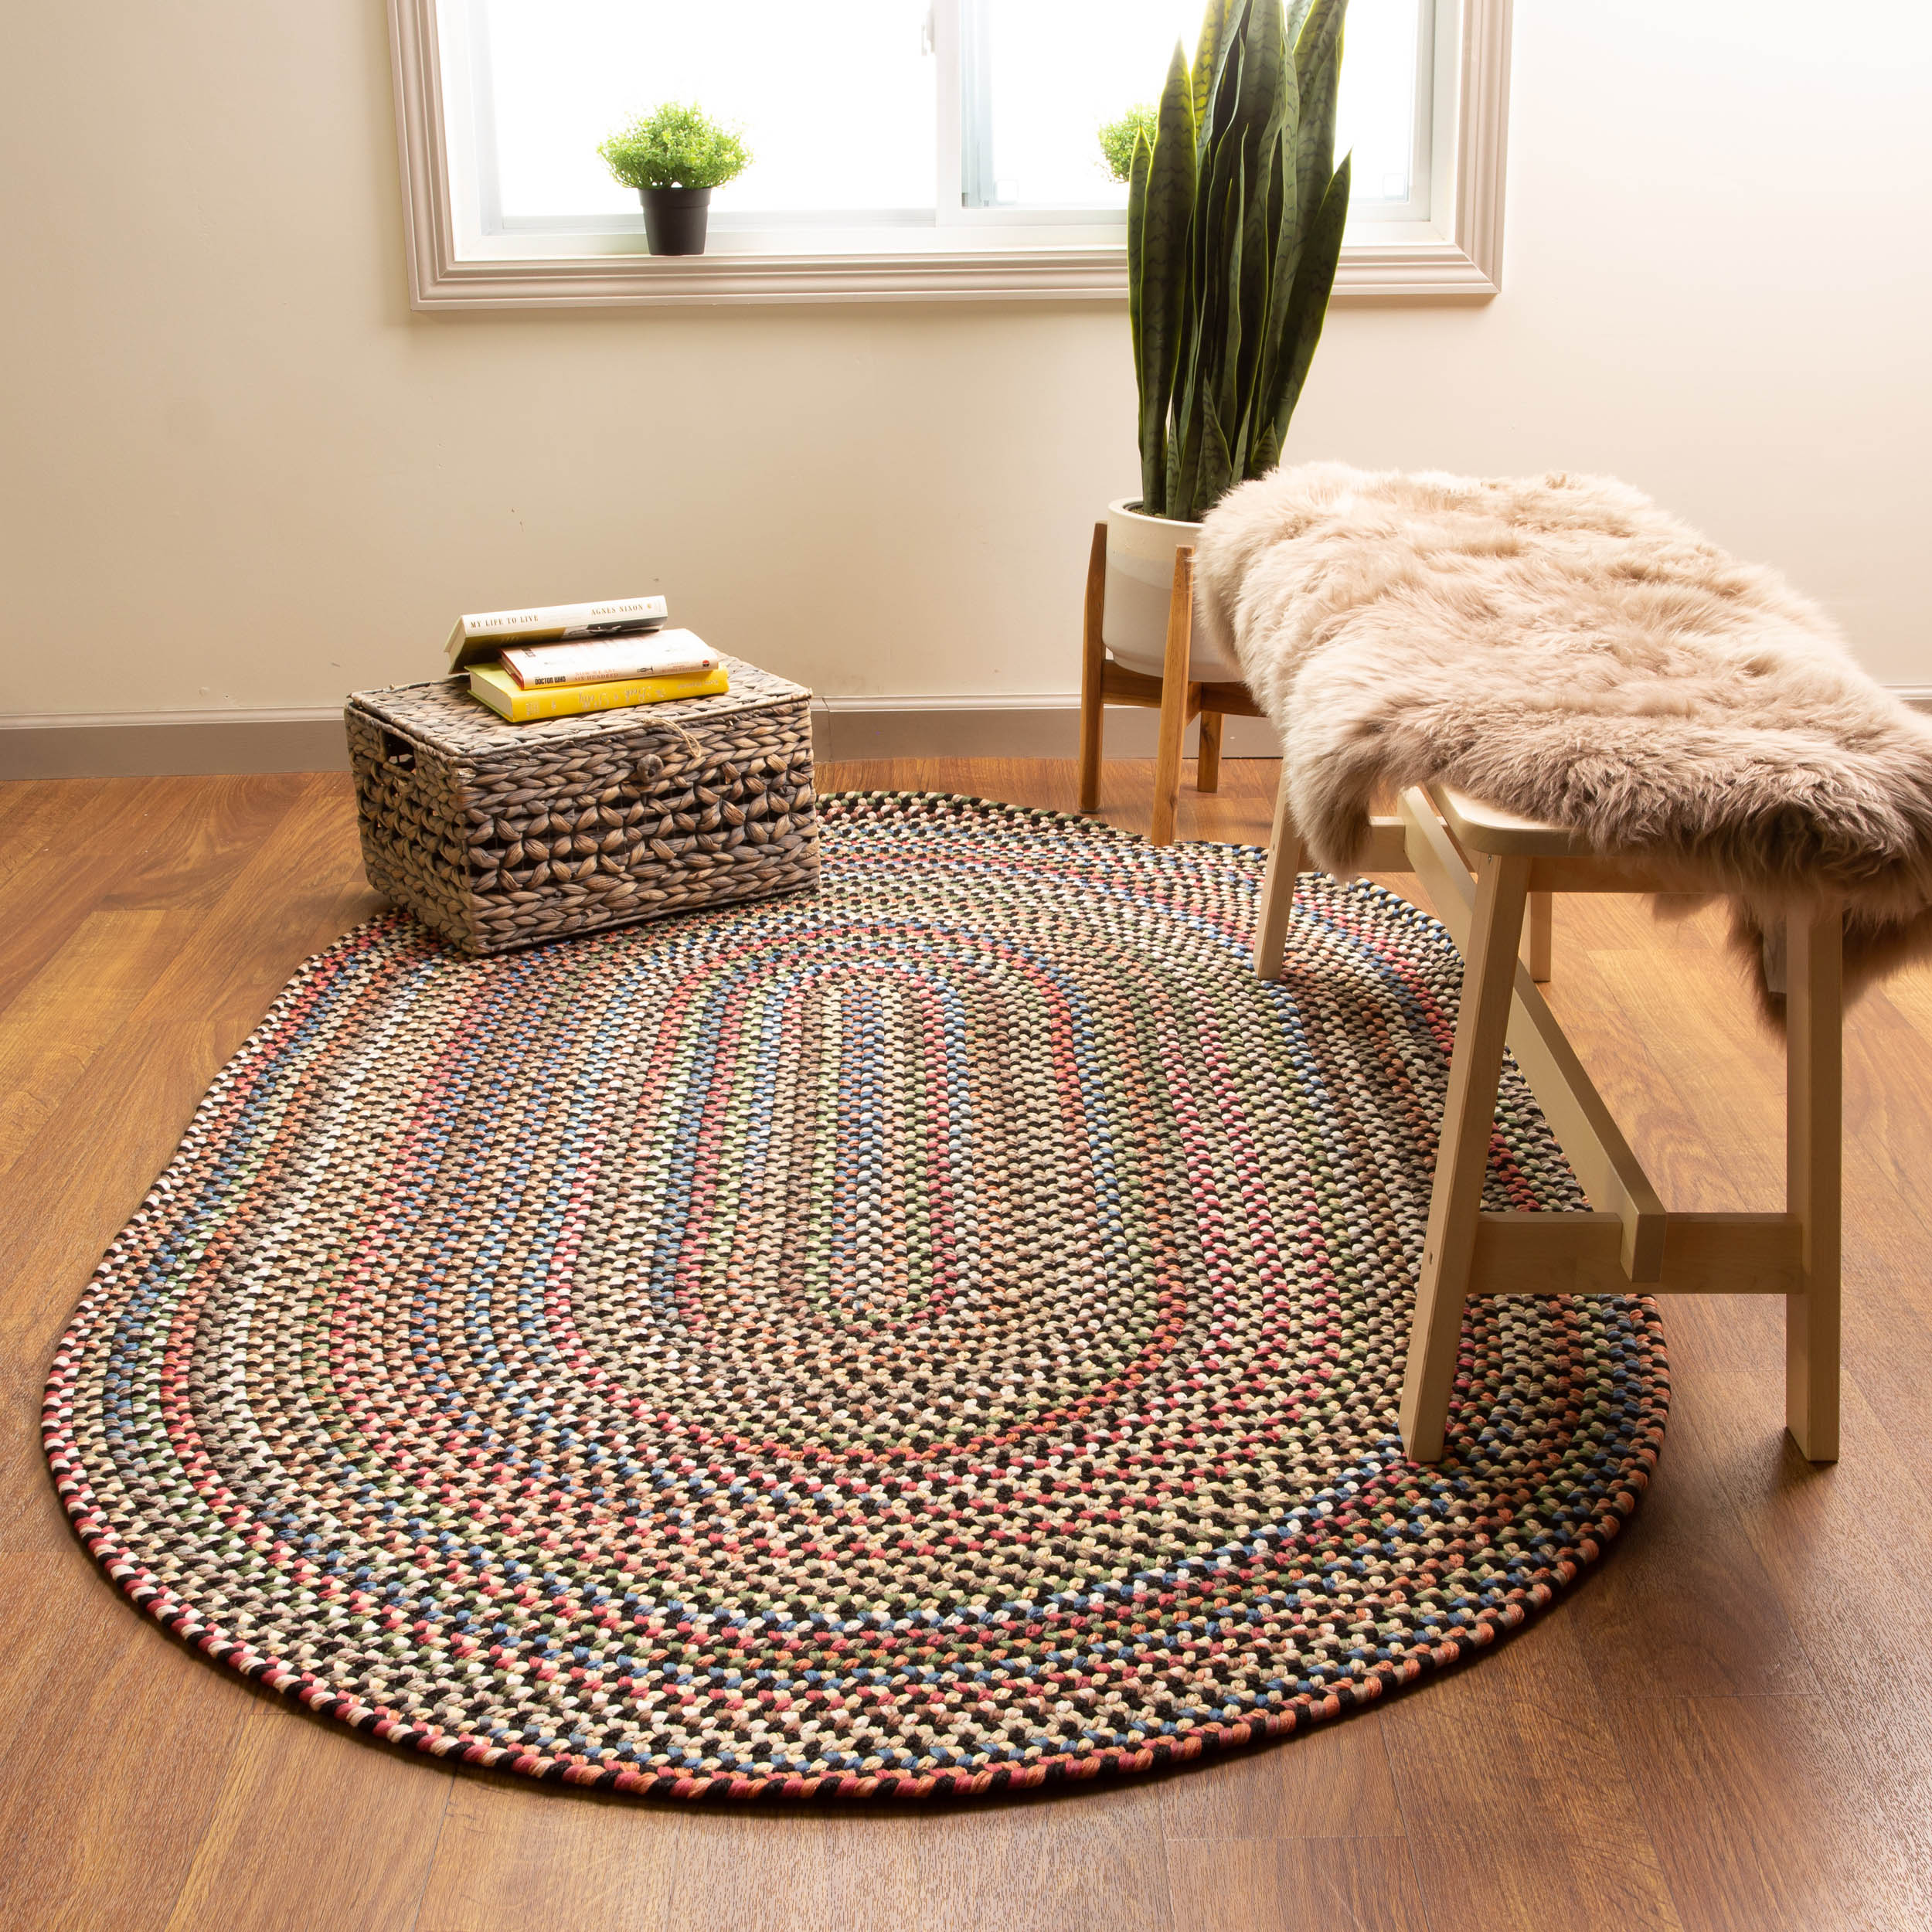 Handmade Braided Rug for Farmhouse Kitchens & Interiors - Made in the USA -  Ridgewood